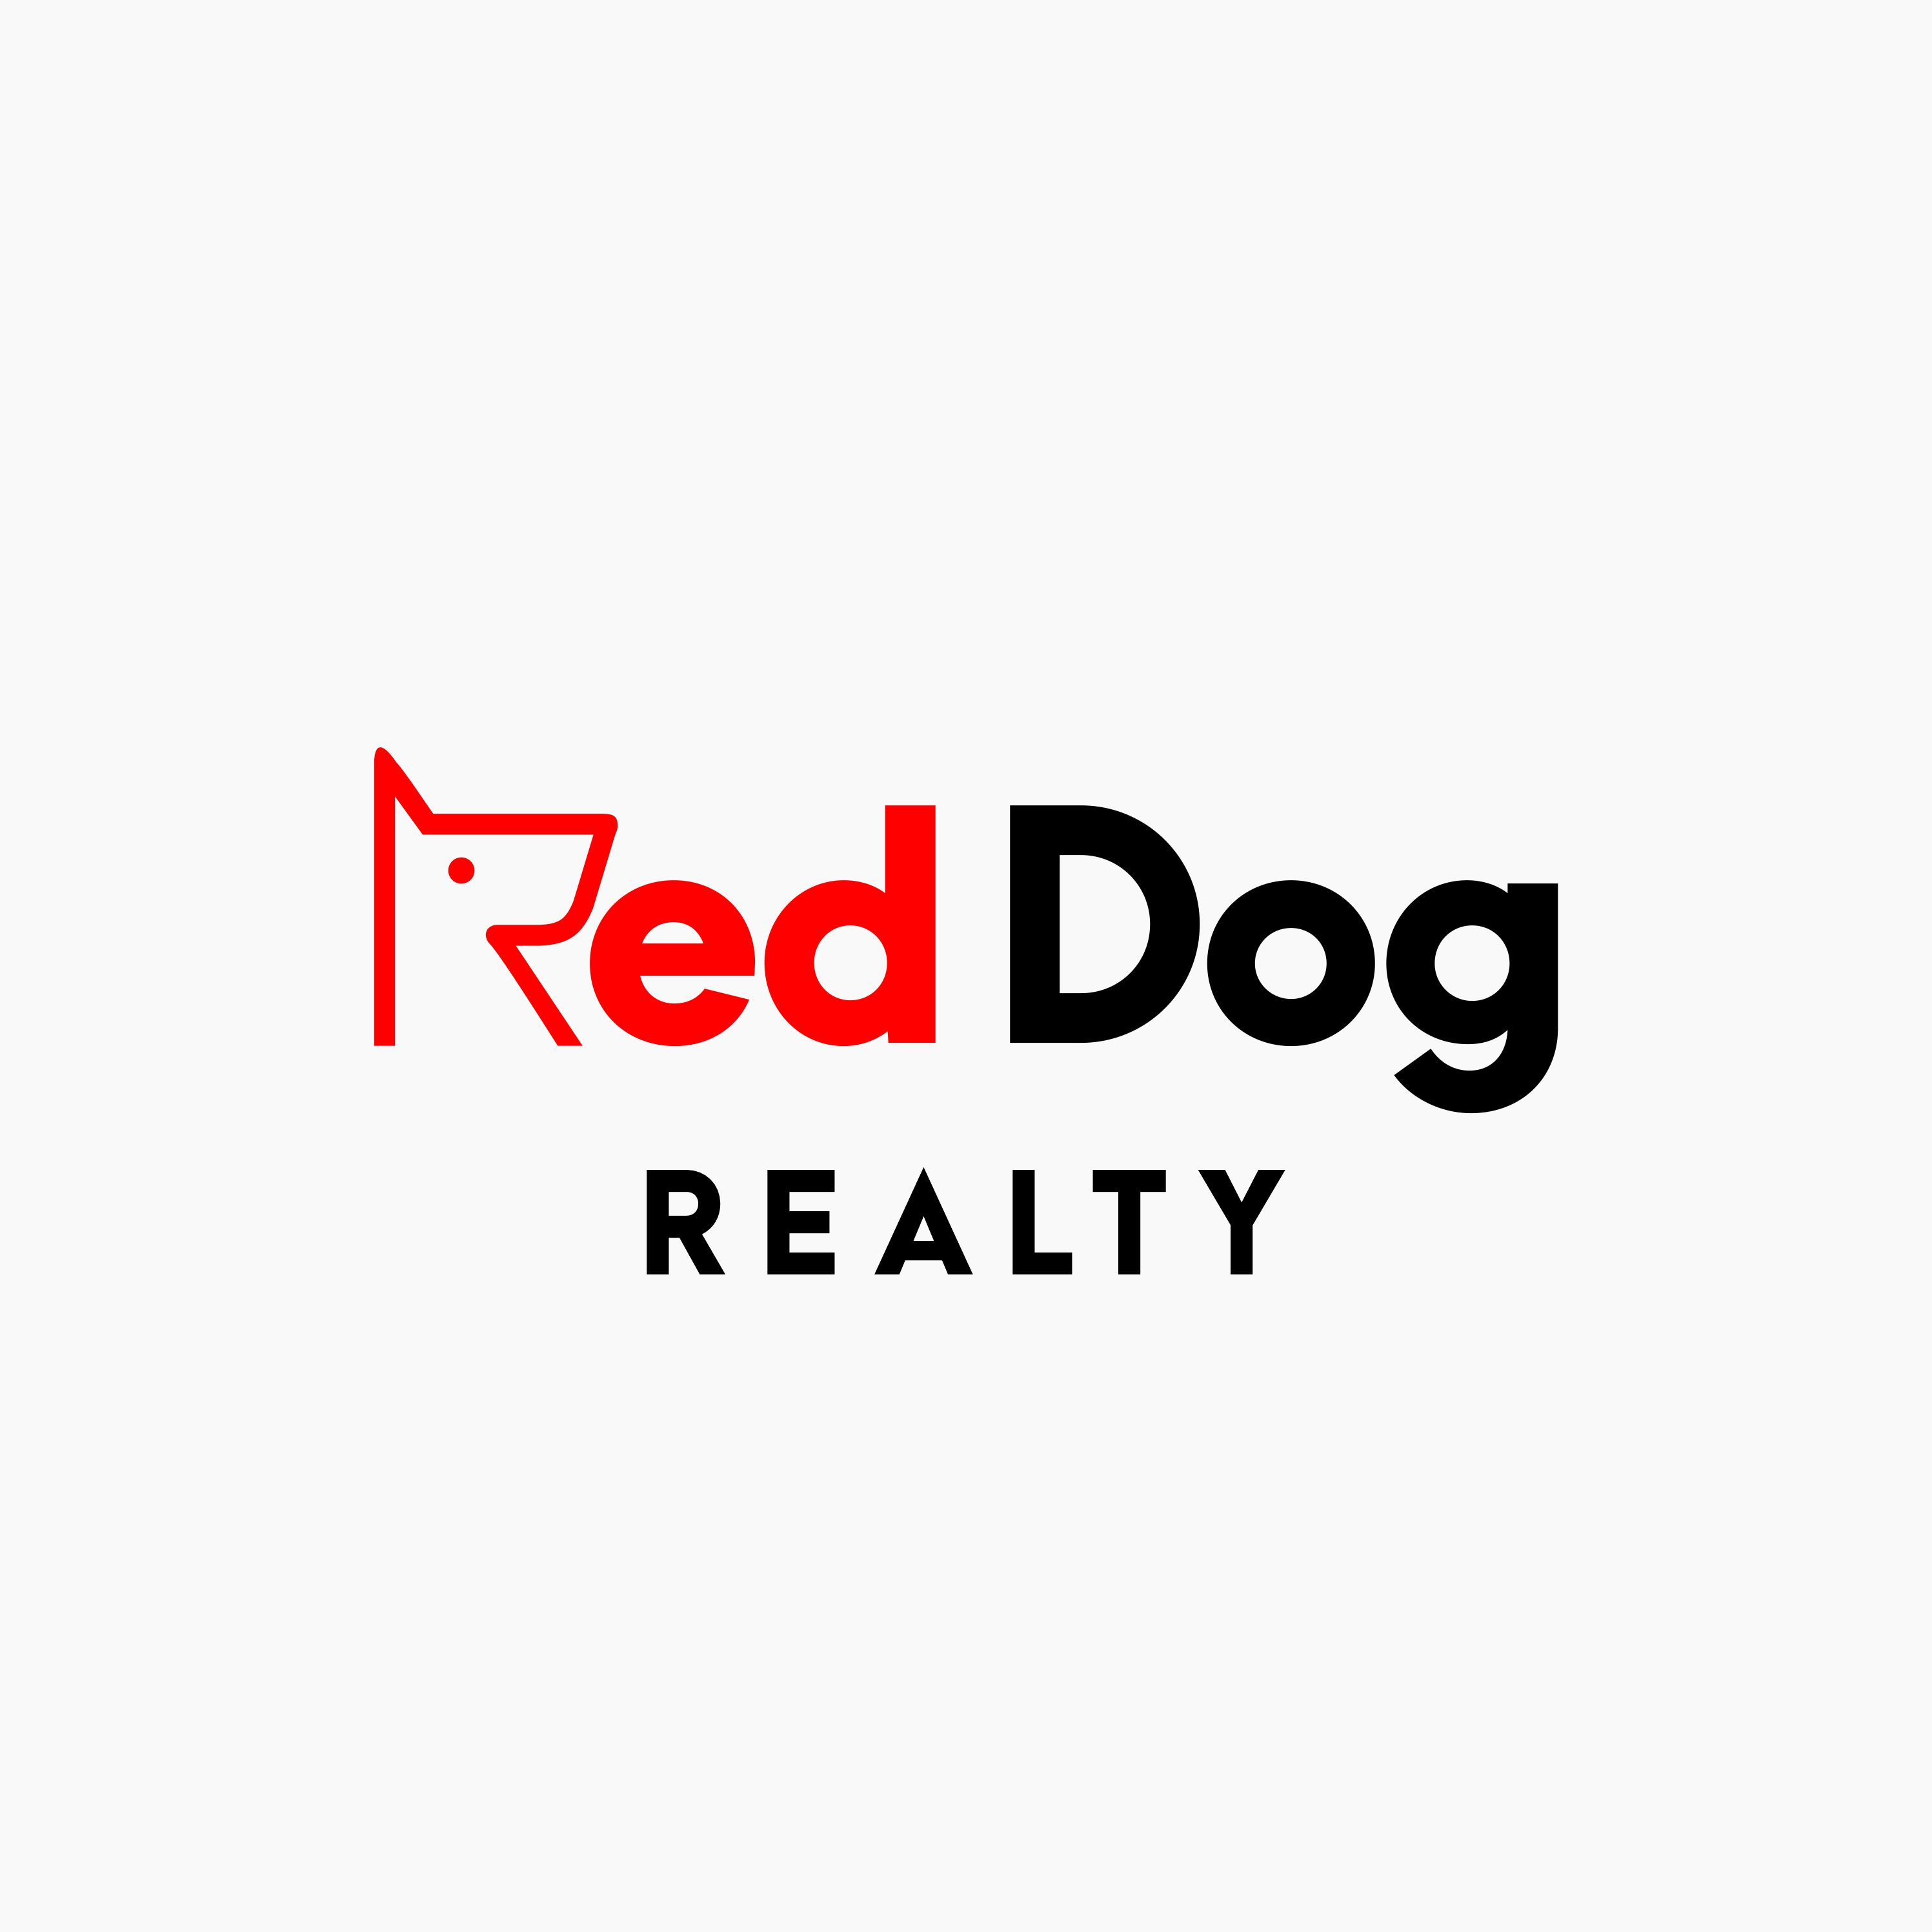 Red Dog Realty